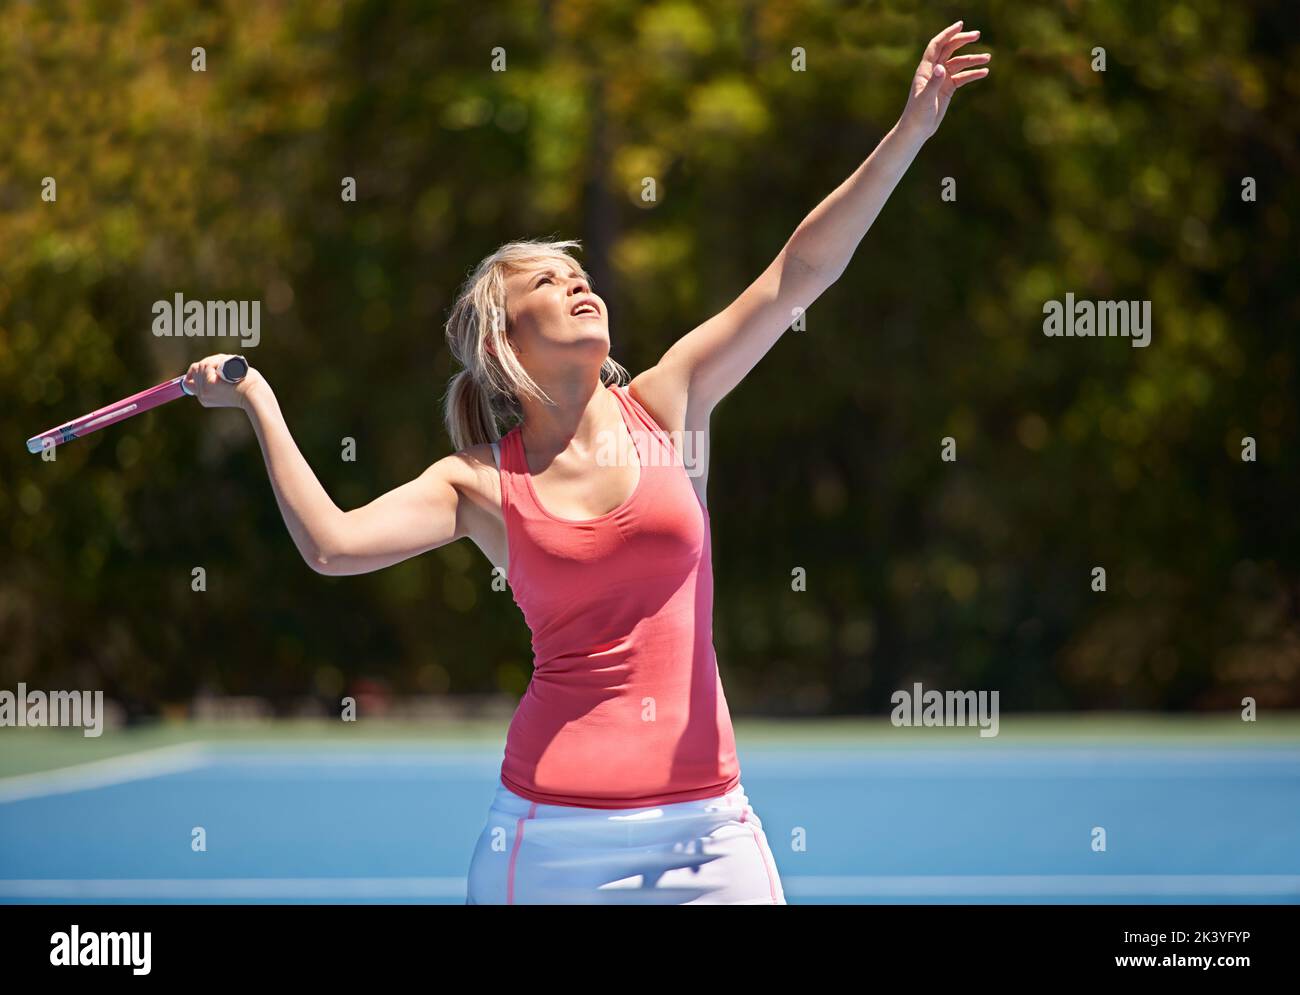 Shes going to be a tennis star. A young tennis athlete in the middle of a set. Stock Photo